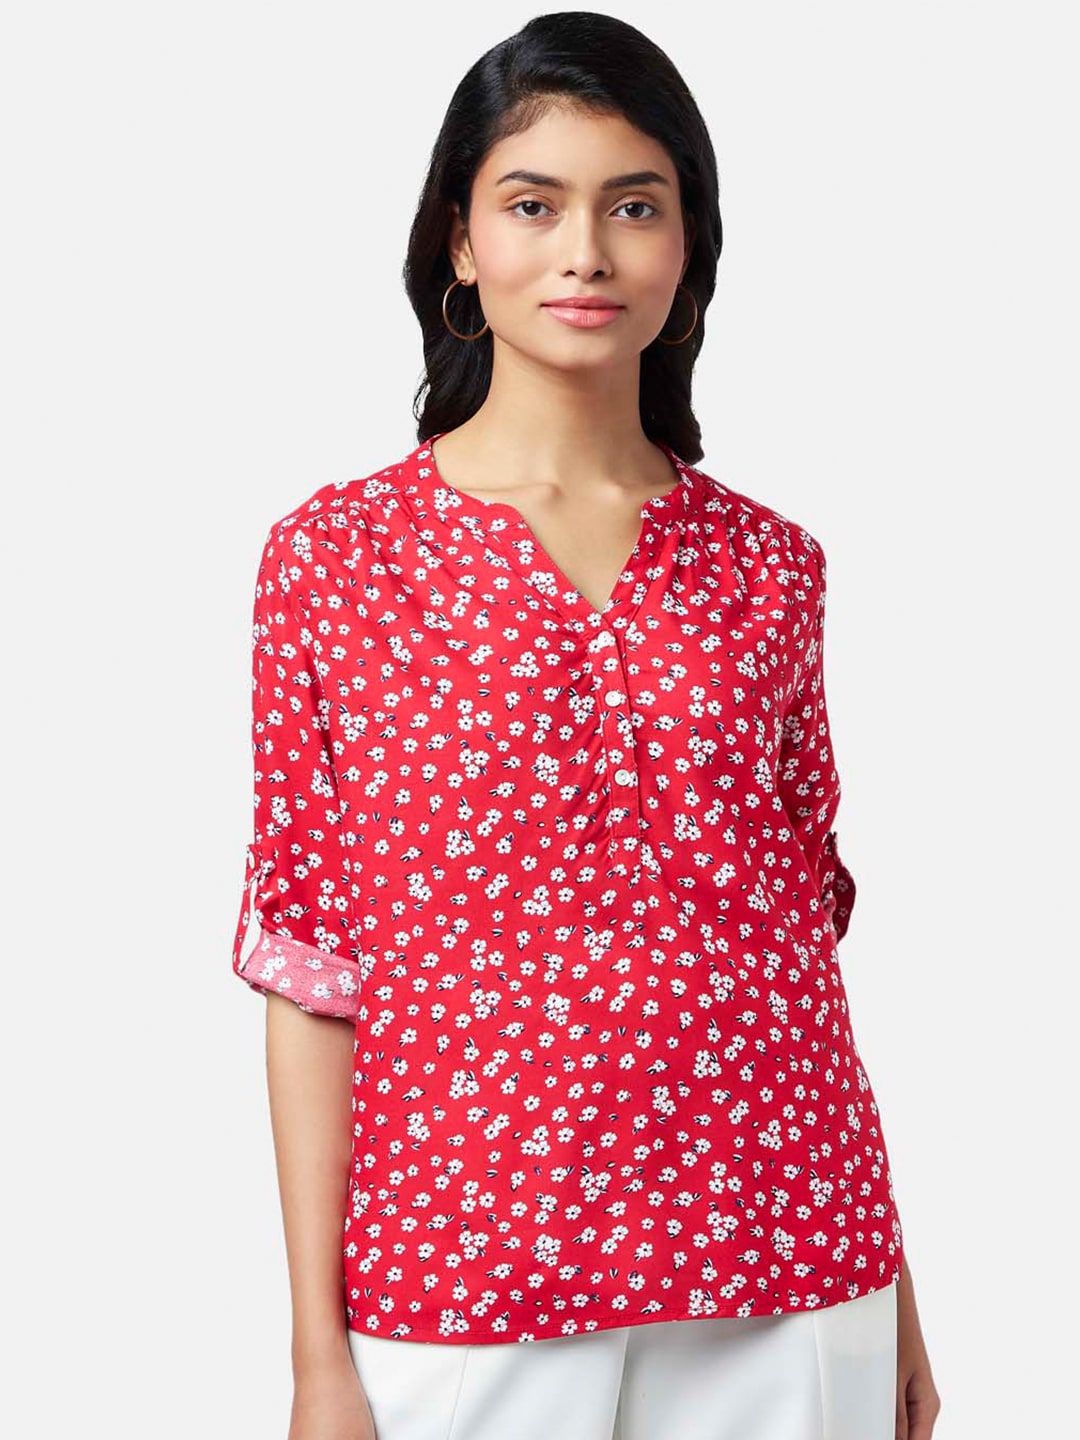 Honey by Pantaloons Floral Print Roll-Up Sleeves Top Price in India